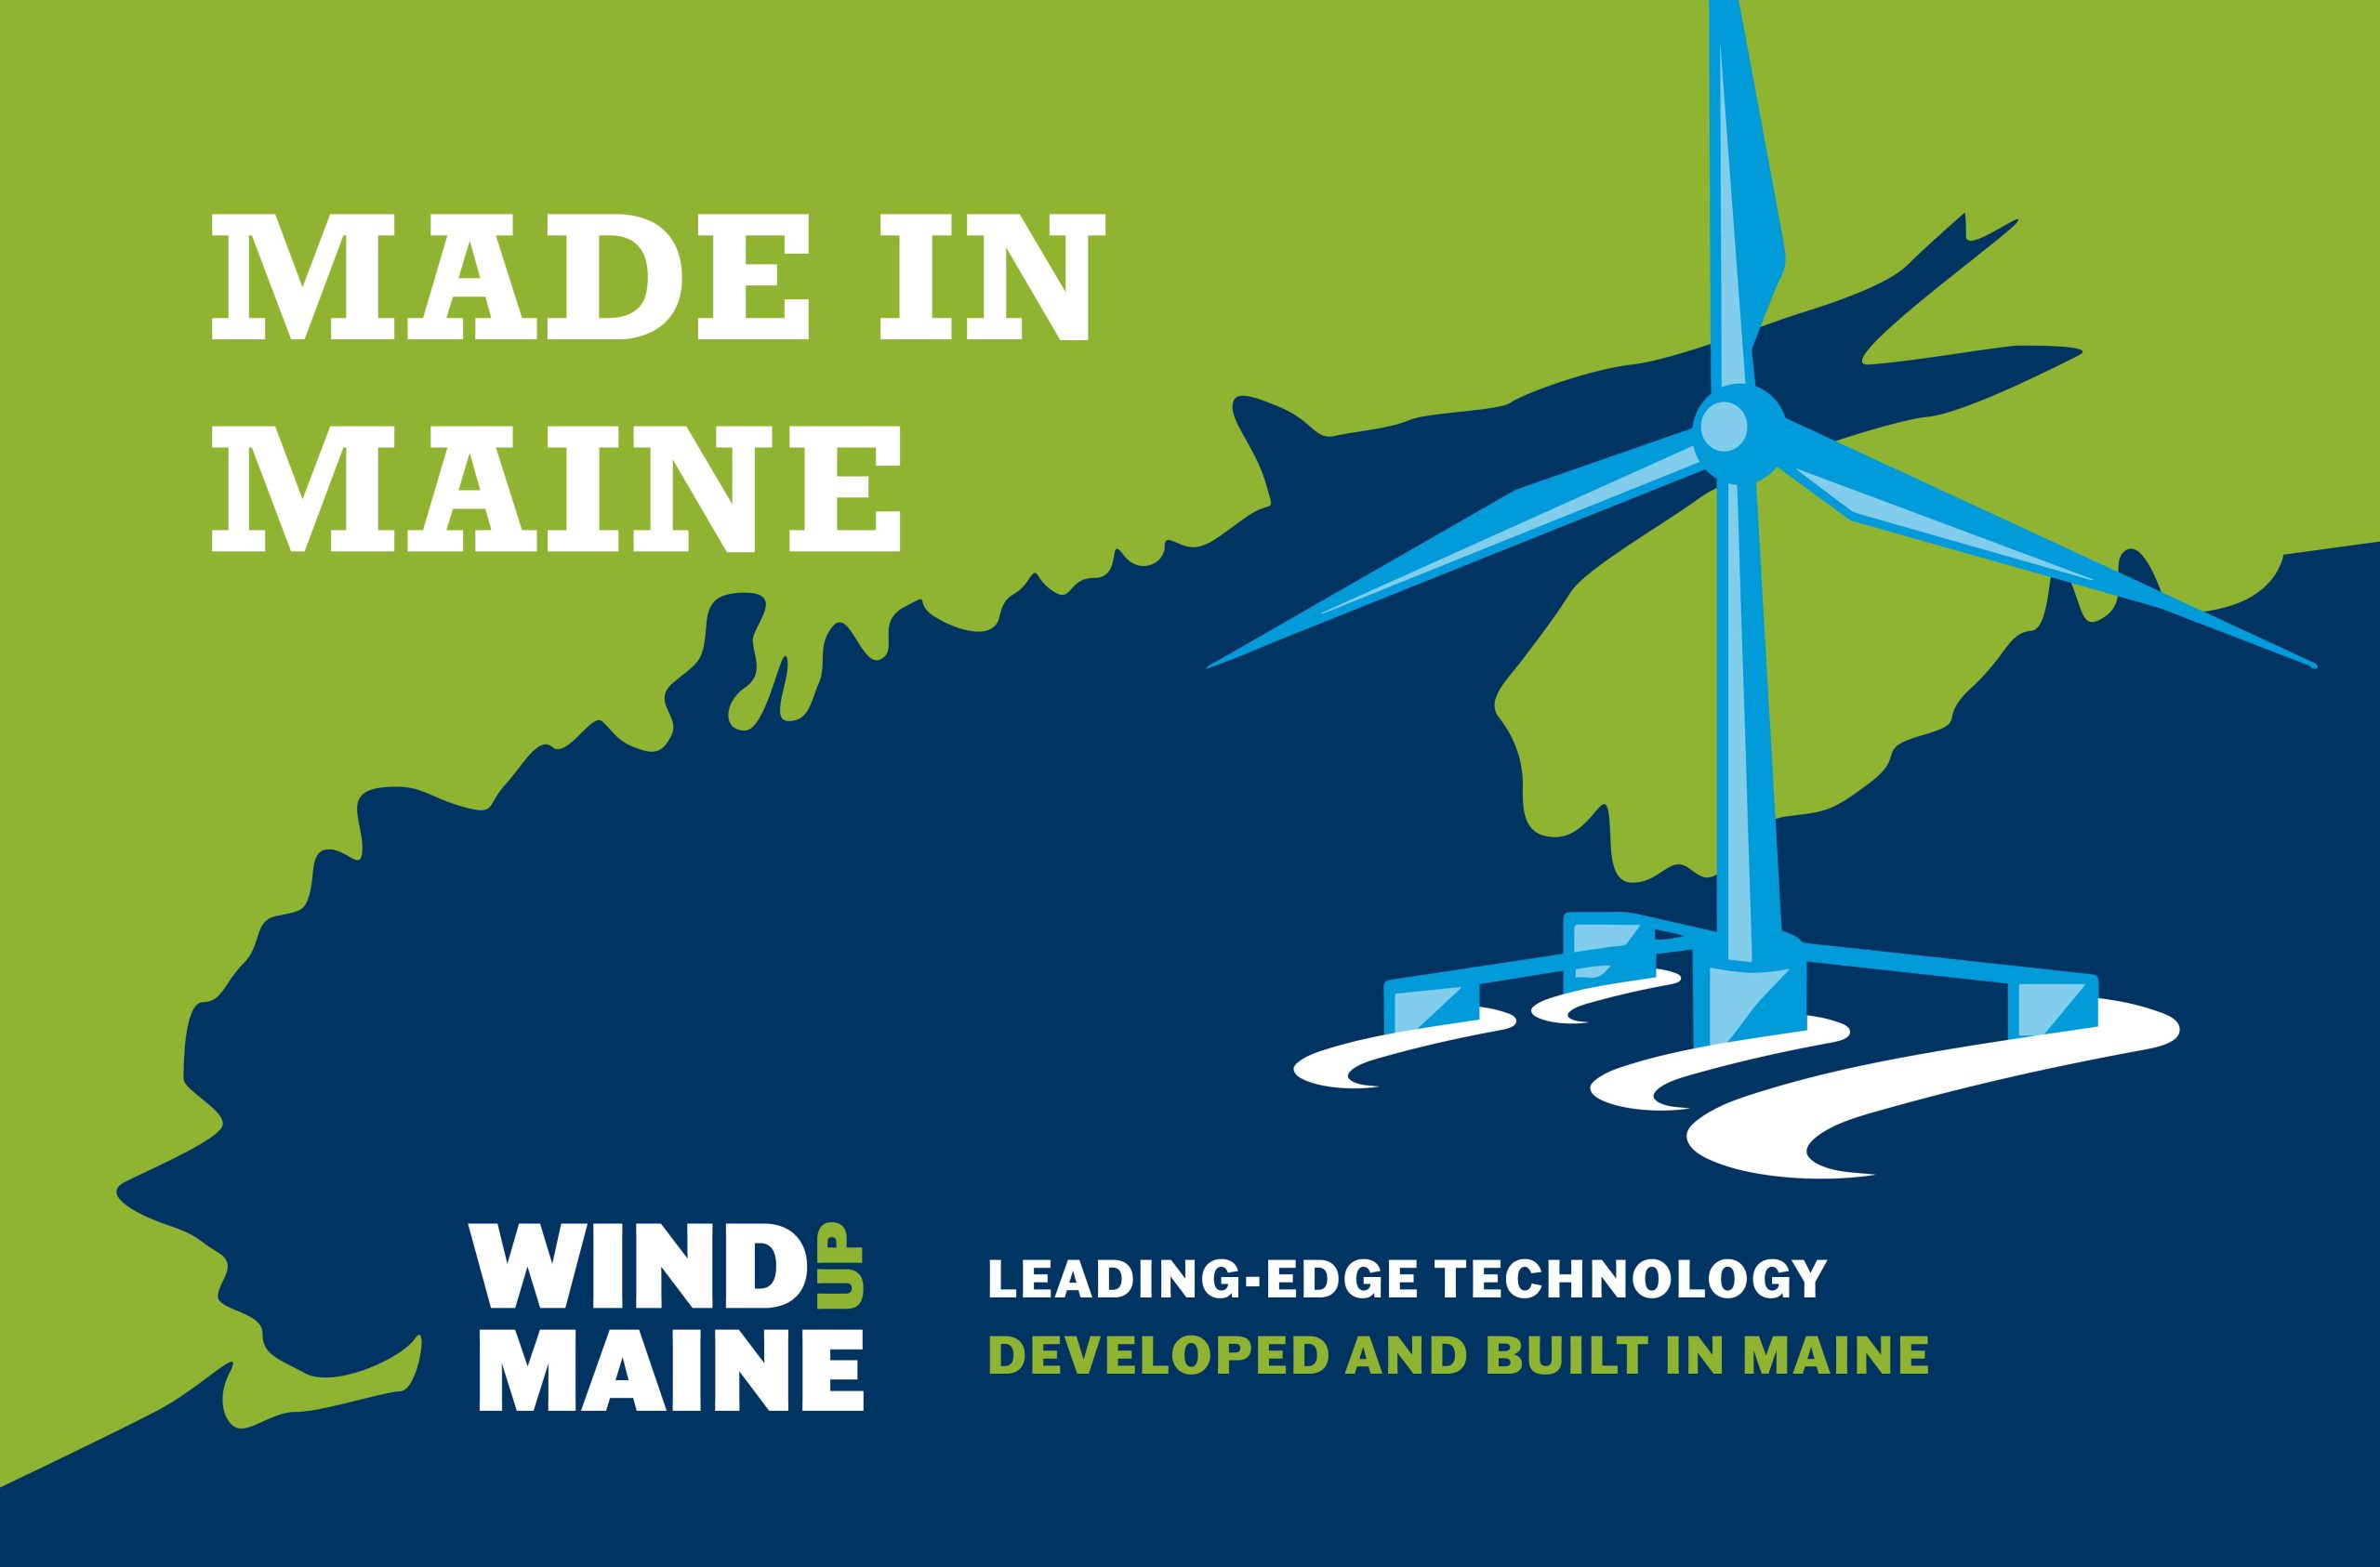 Offshore wind made in Maine graphic